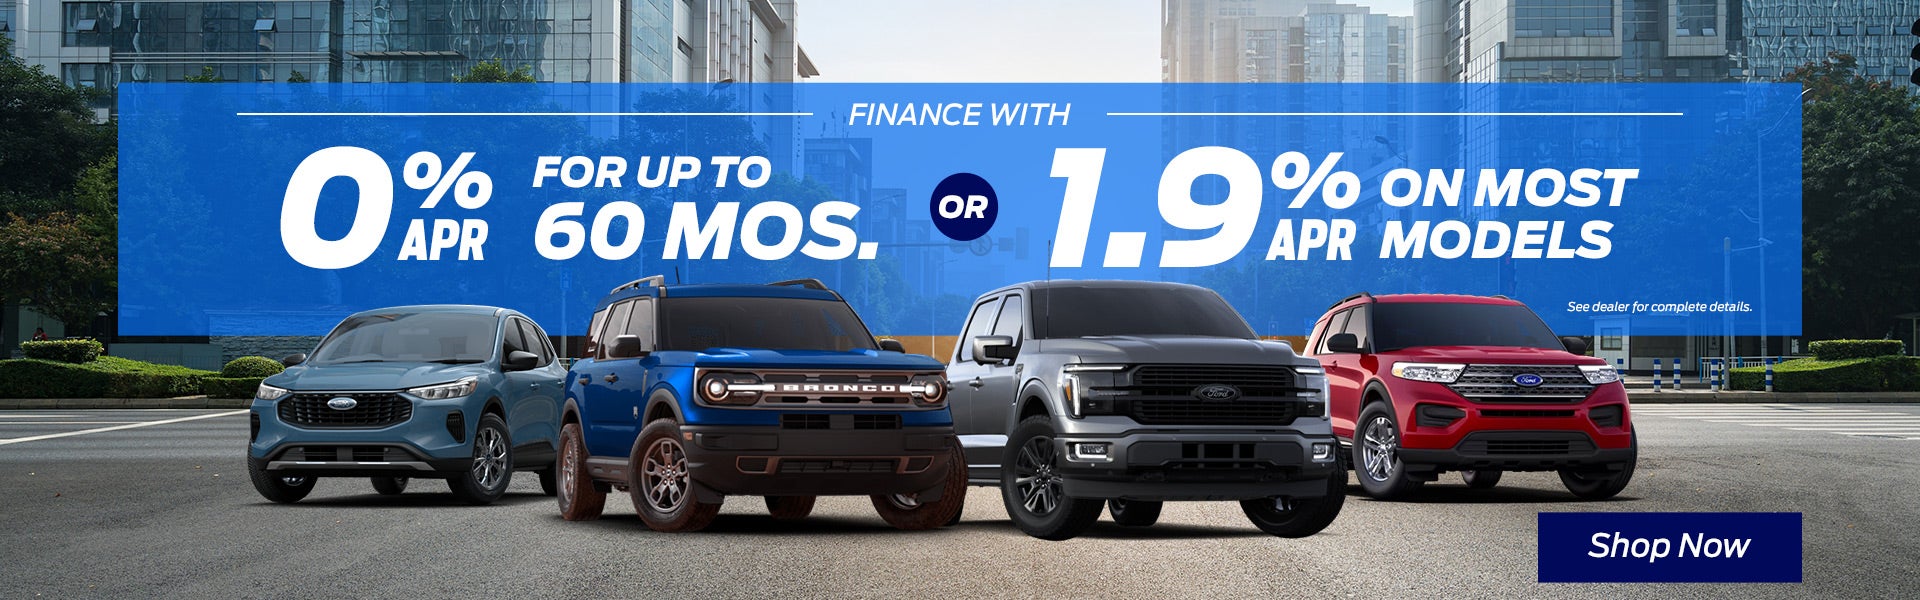 APR Offers on Top New Ford Models